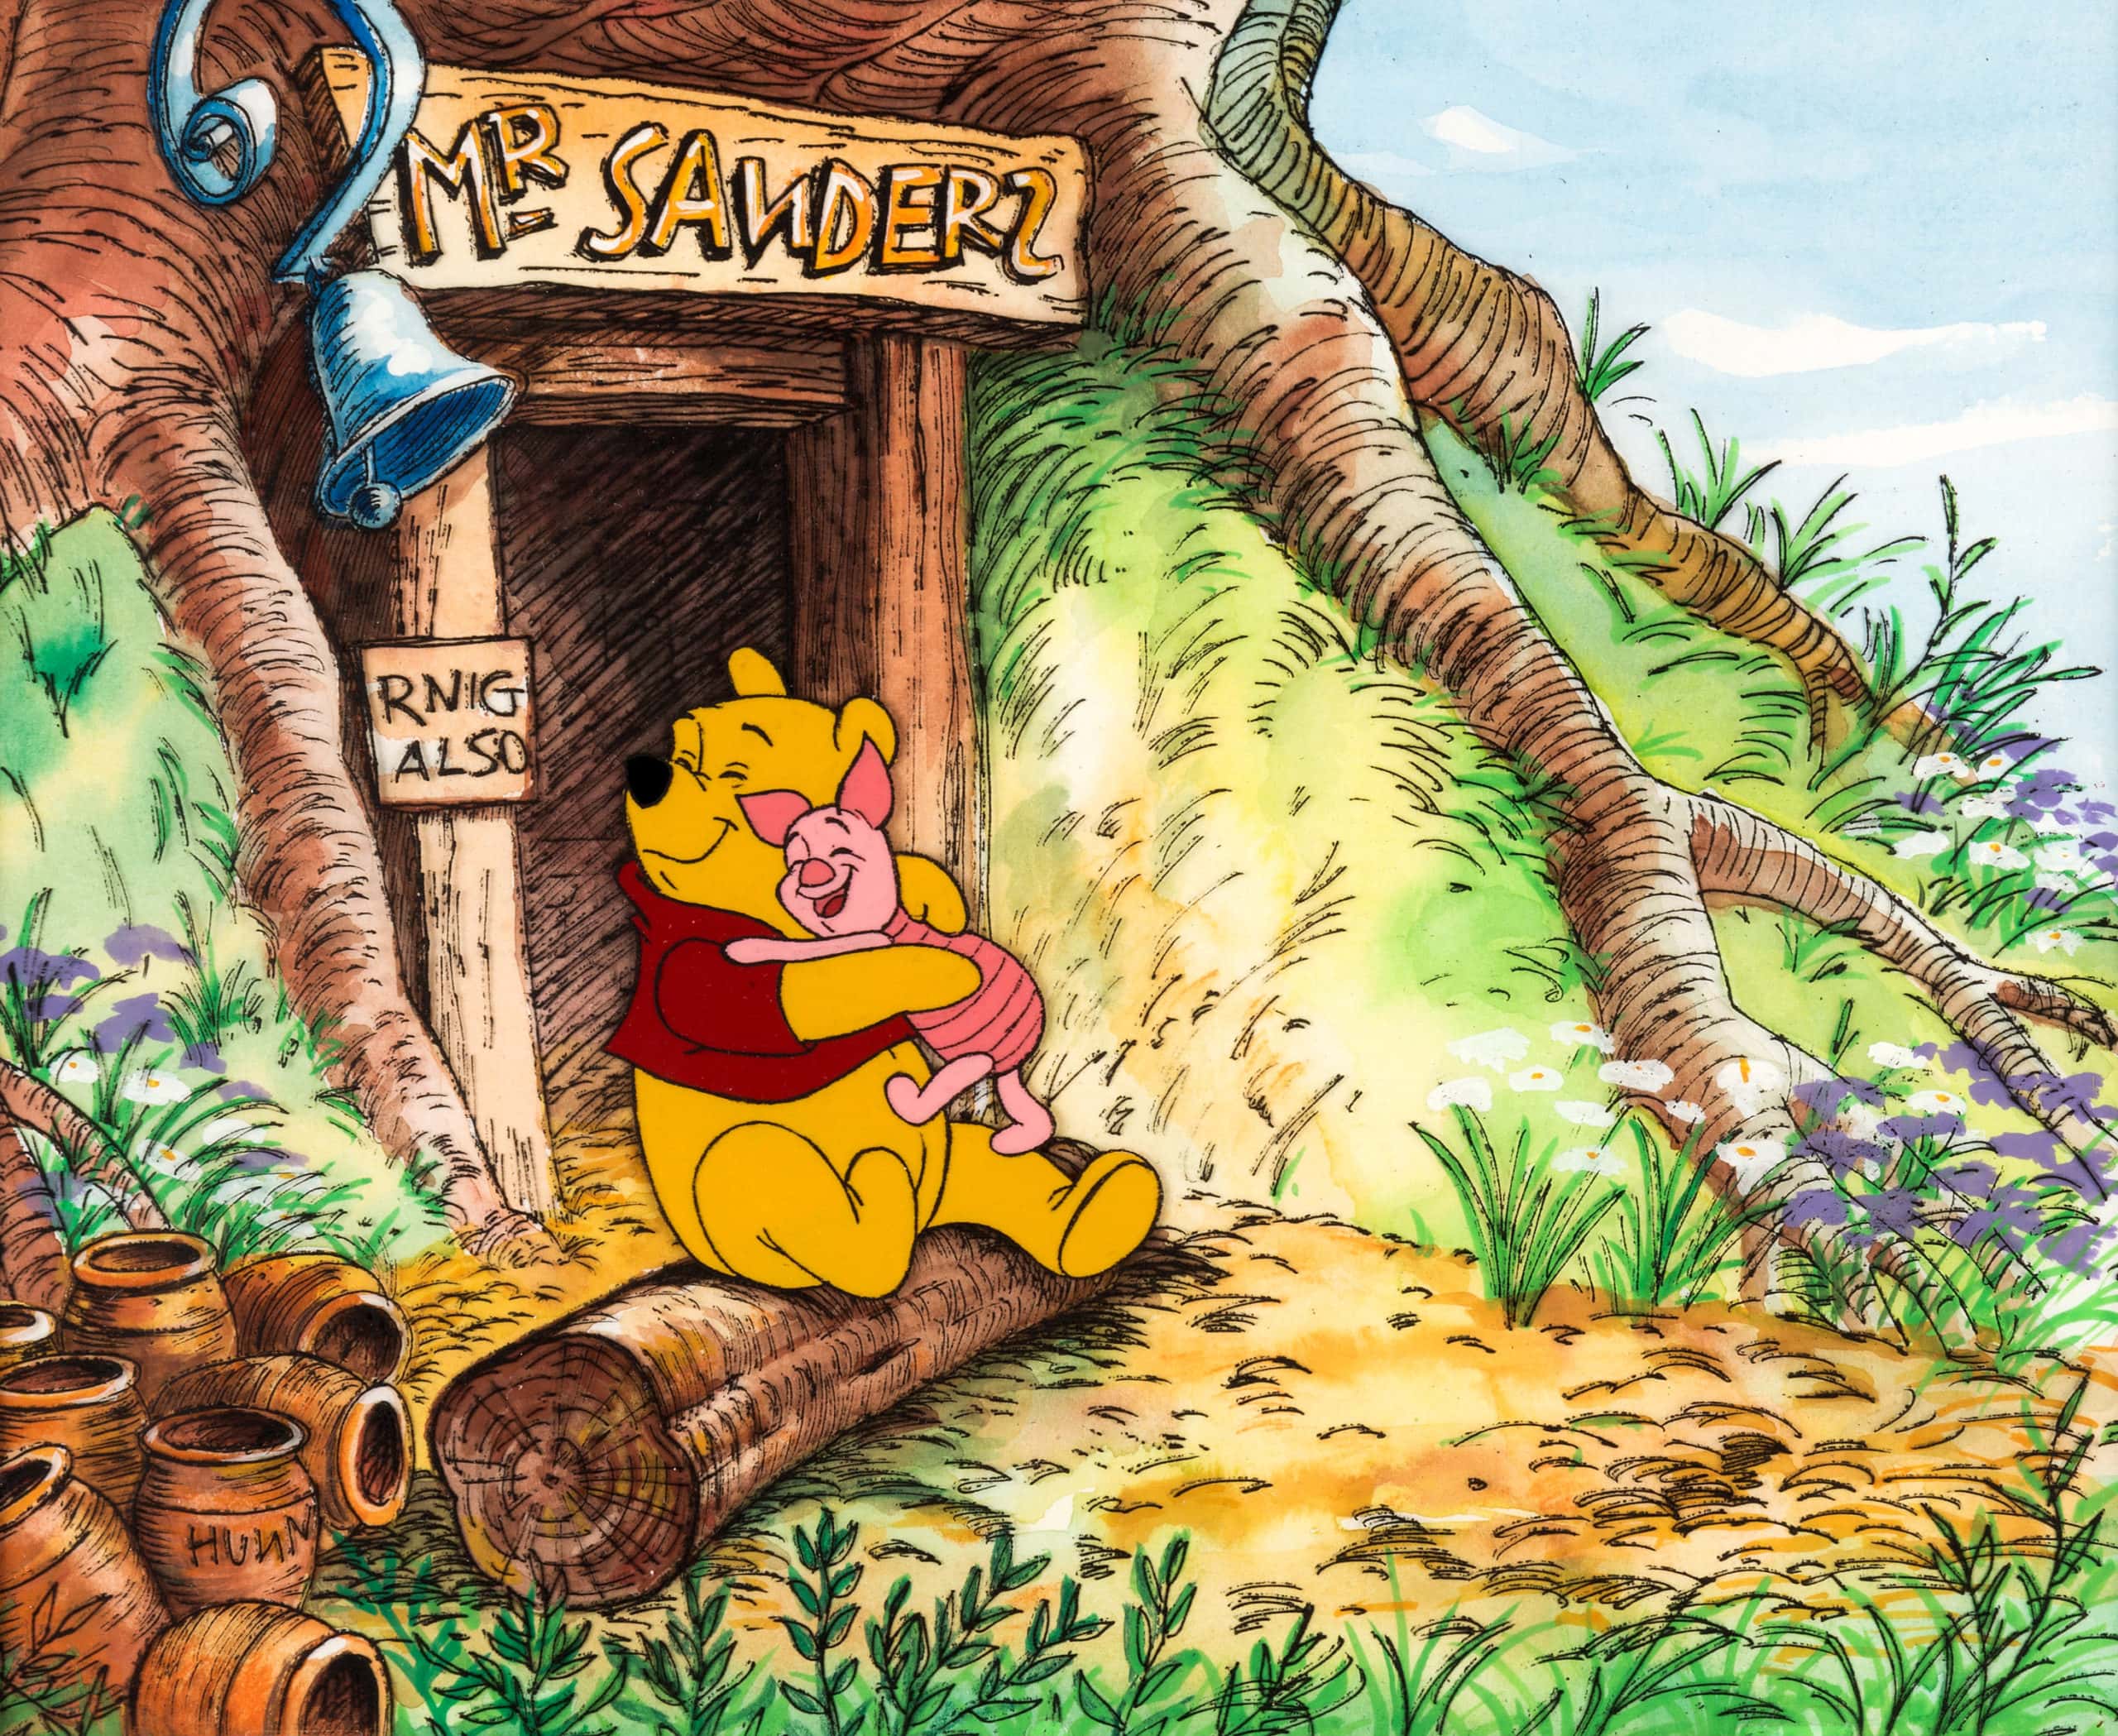 11 Fun facts about Winnie the Pooh - Between Us Parents